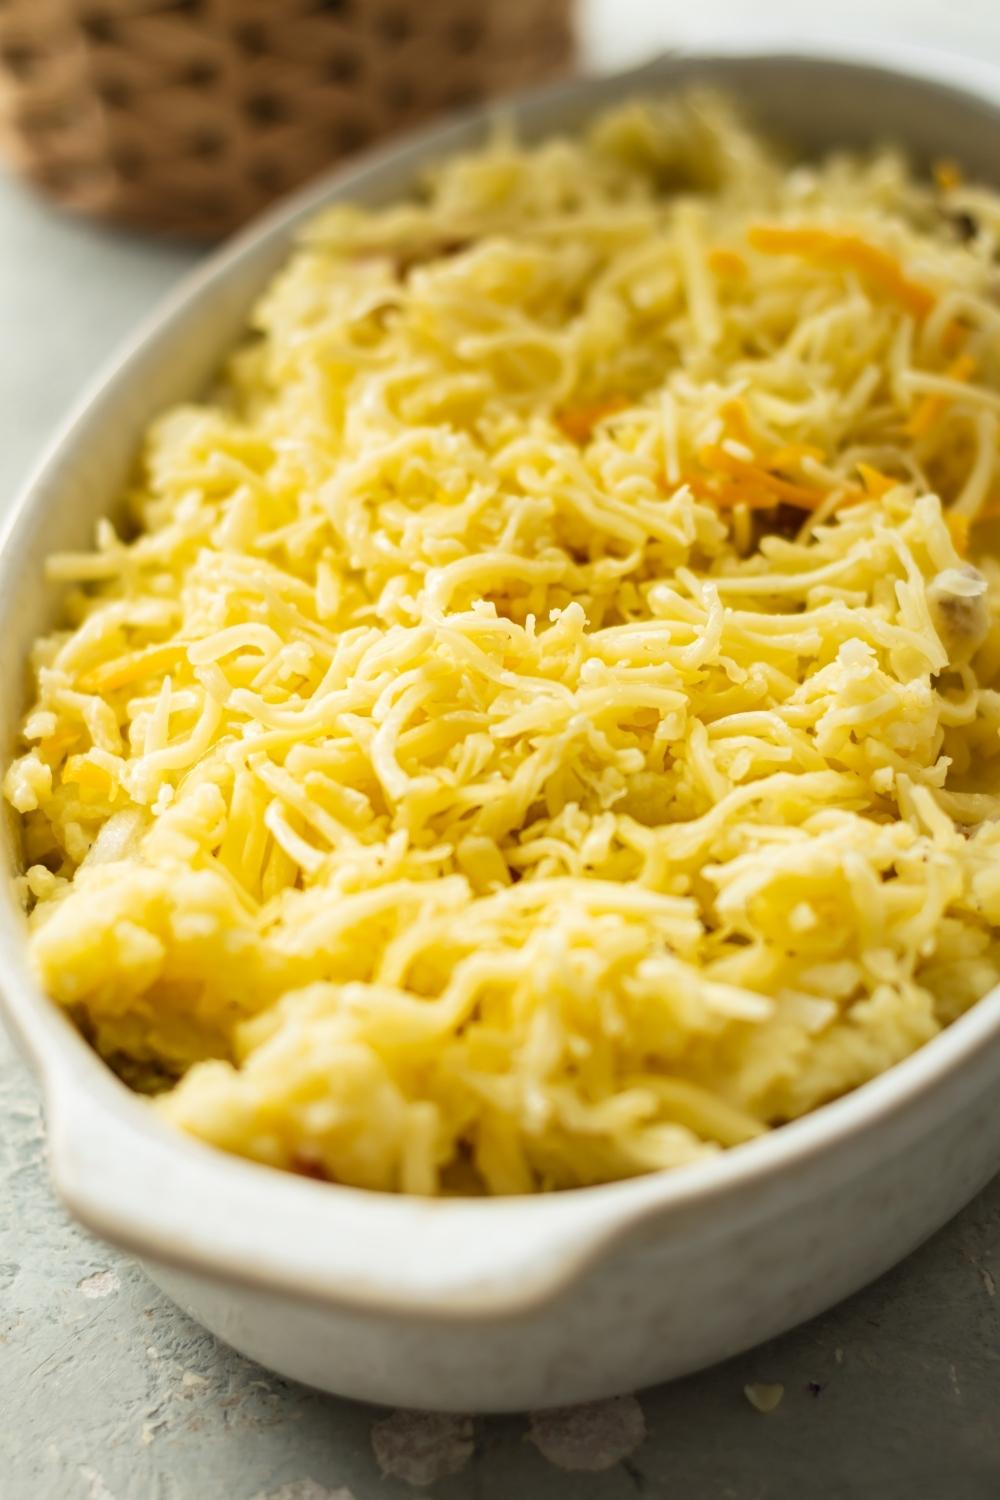 Shredded cheese on top of mashed potatoes in a casserole dish.